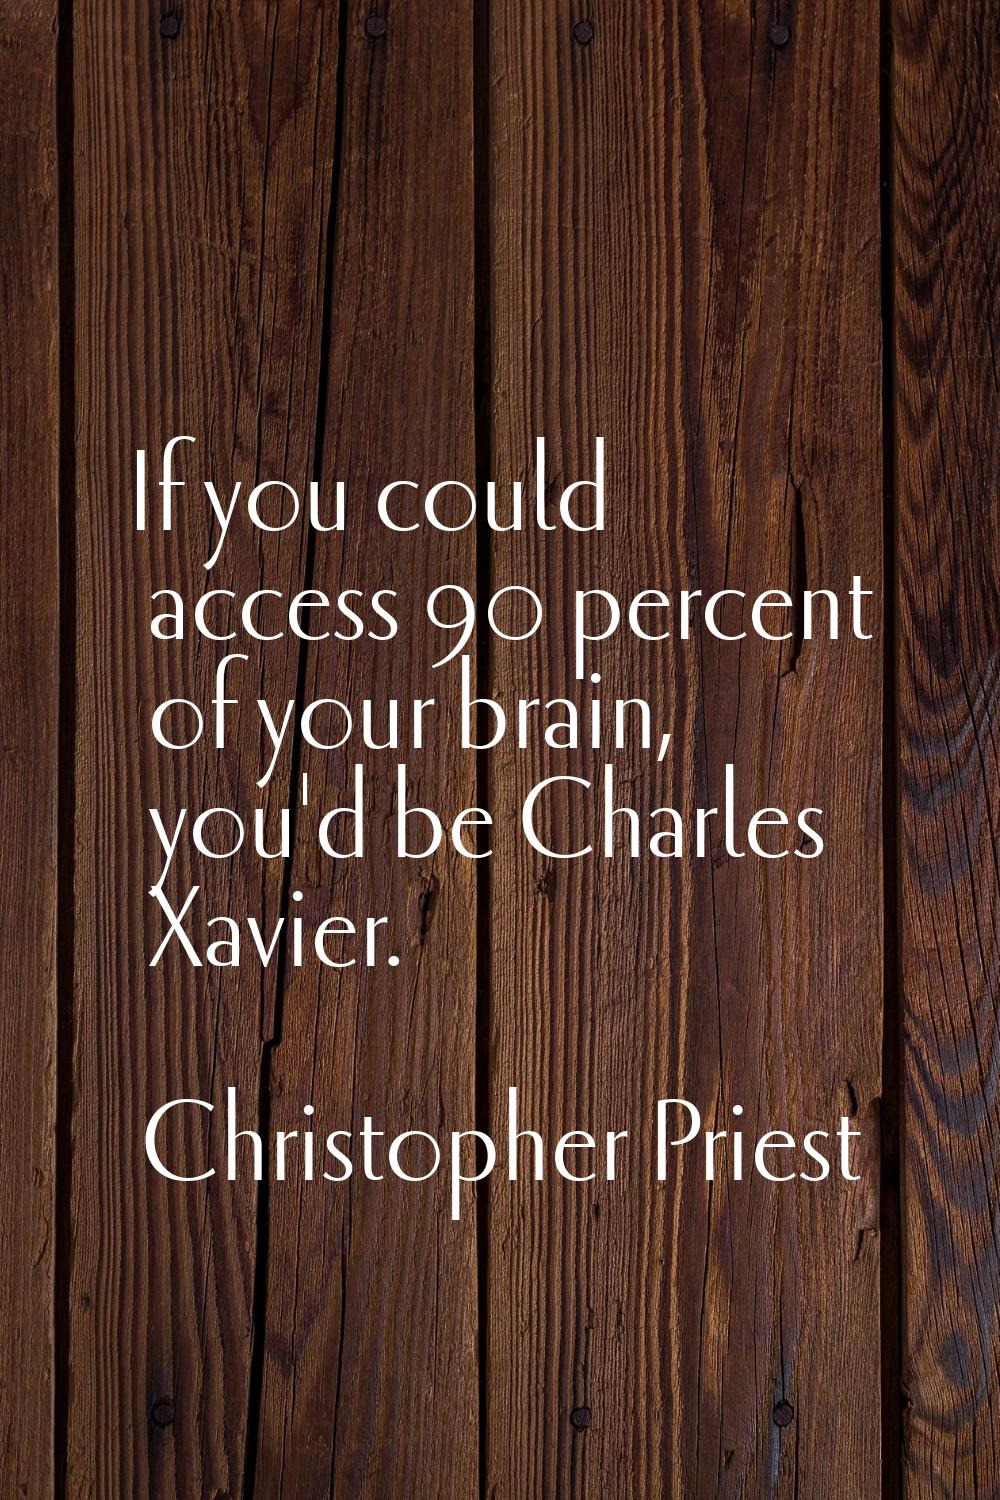 If you could access 90 percent of your brain, you'd be Charles Xavier.